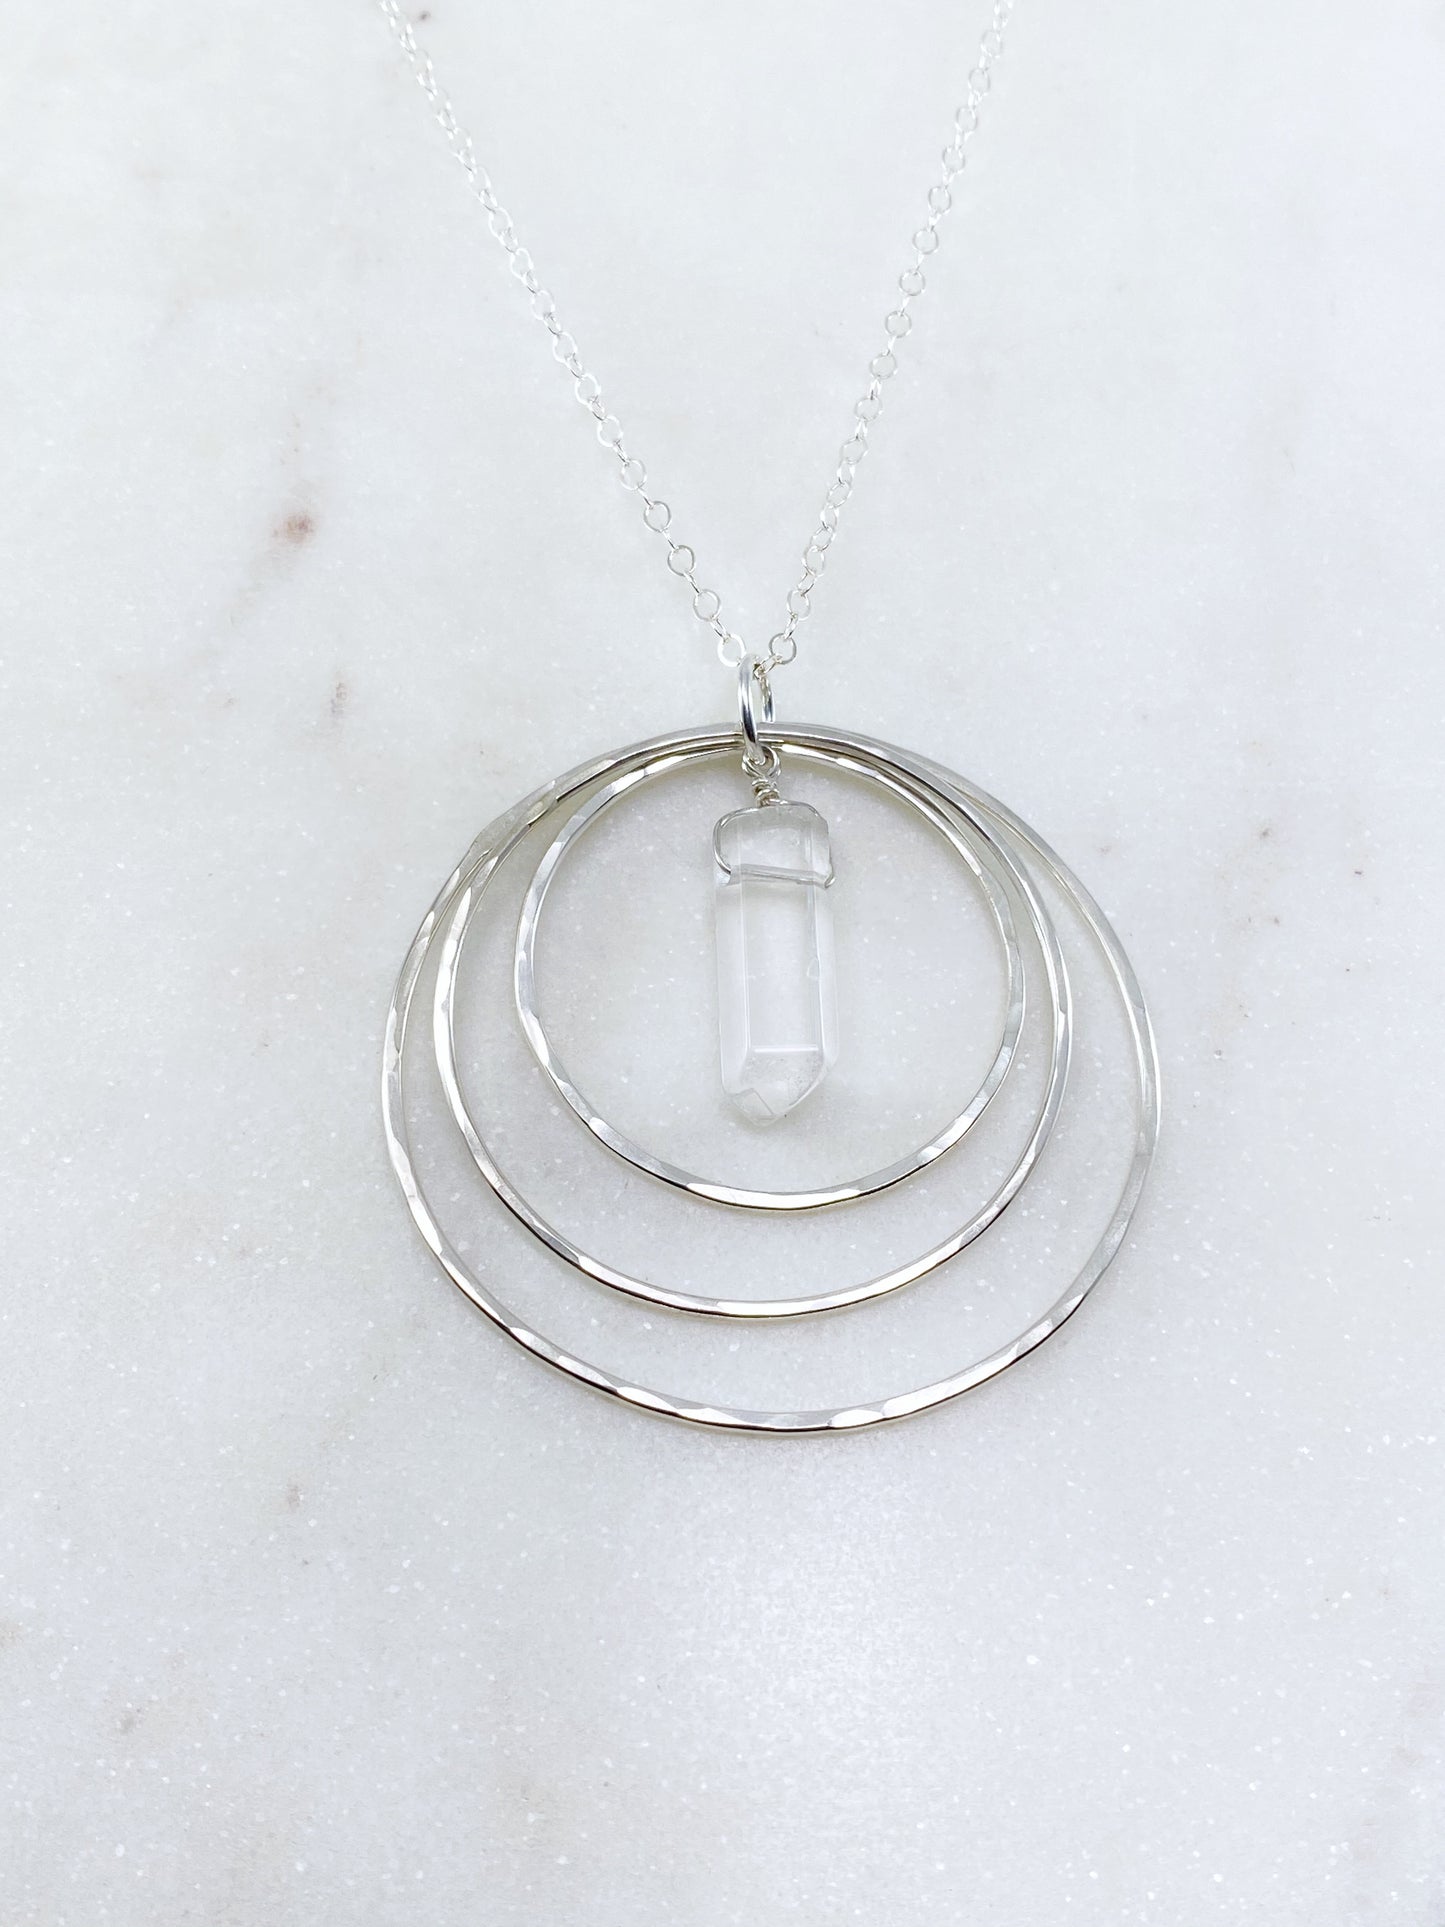 Sterling silver forged triple hoop necklace with quartz